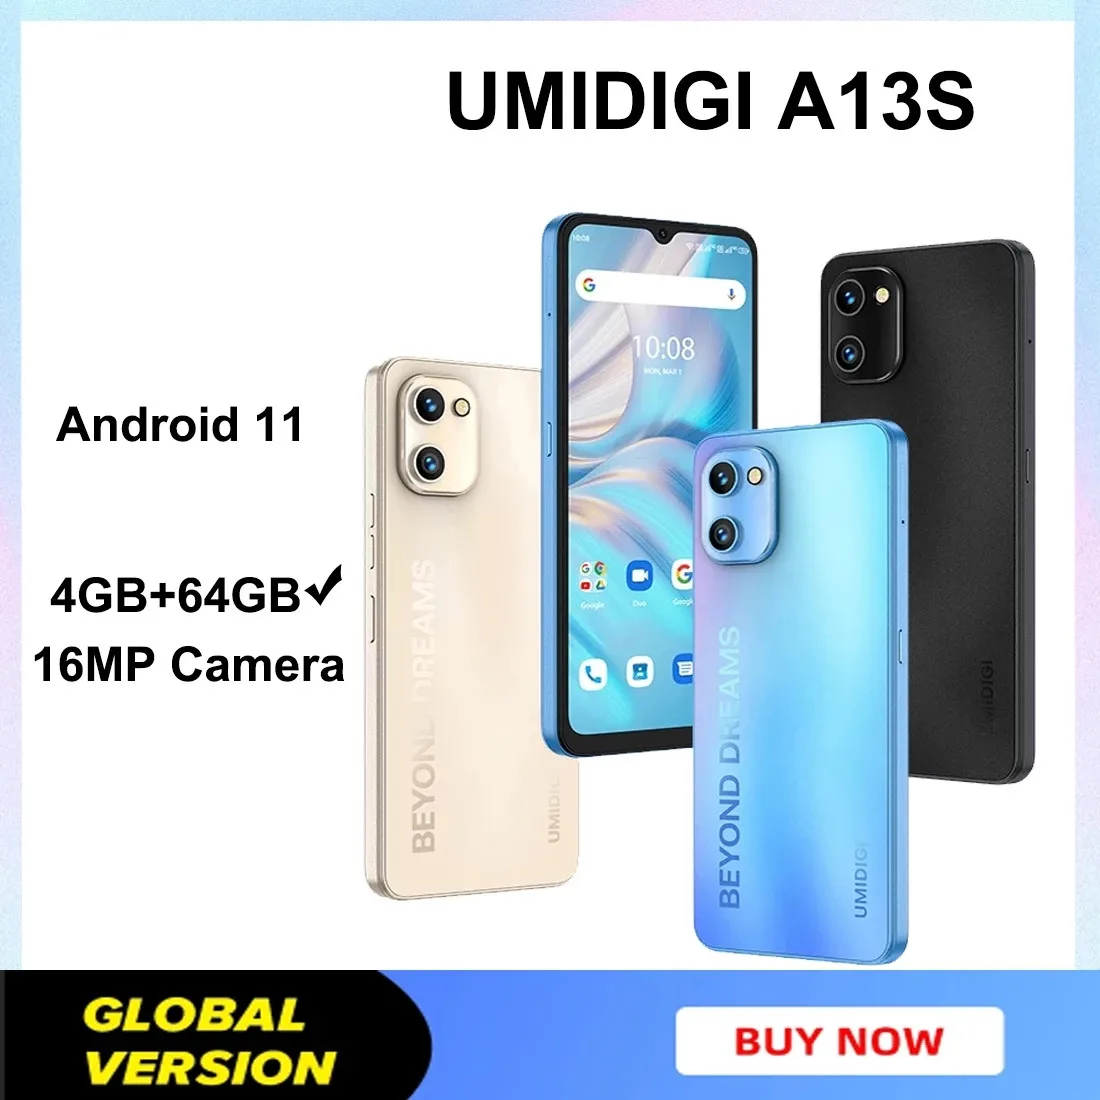 Global Version UMIDIGI A13S 6.7 inch 4GB+64GB Android 11 4G Mobile Phone 16MP Camera 5150mAh Battery Face Unlock Smartphone